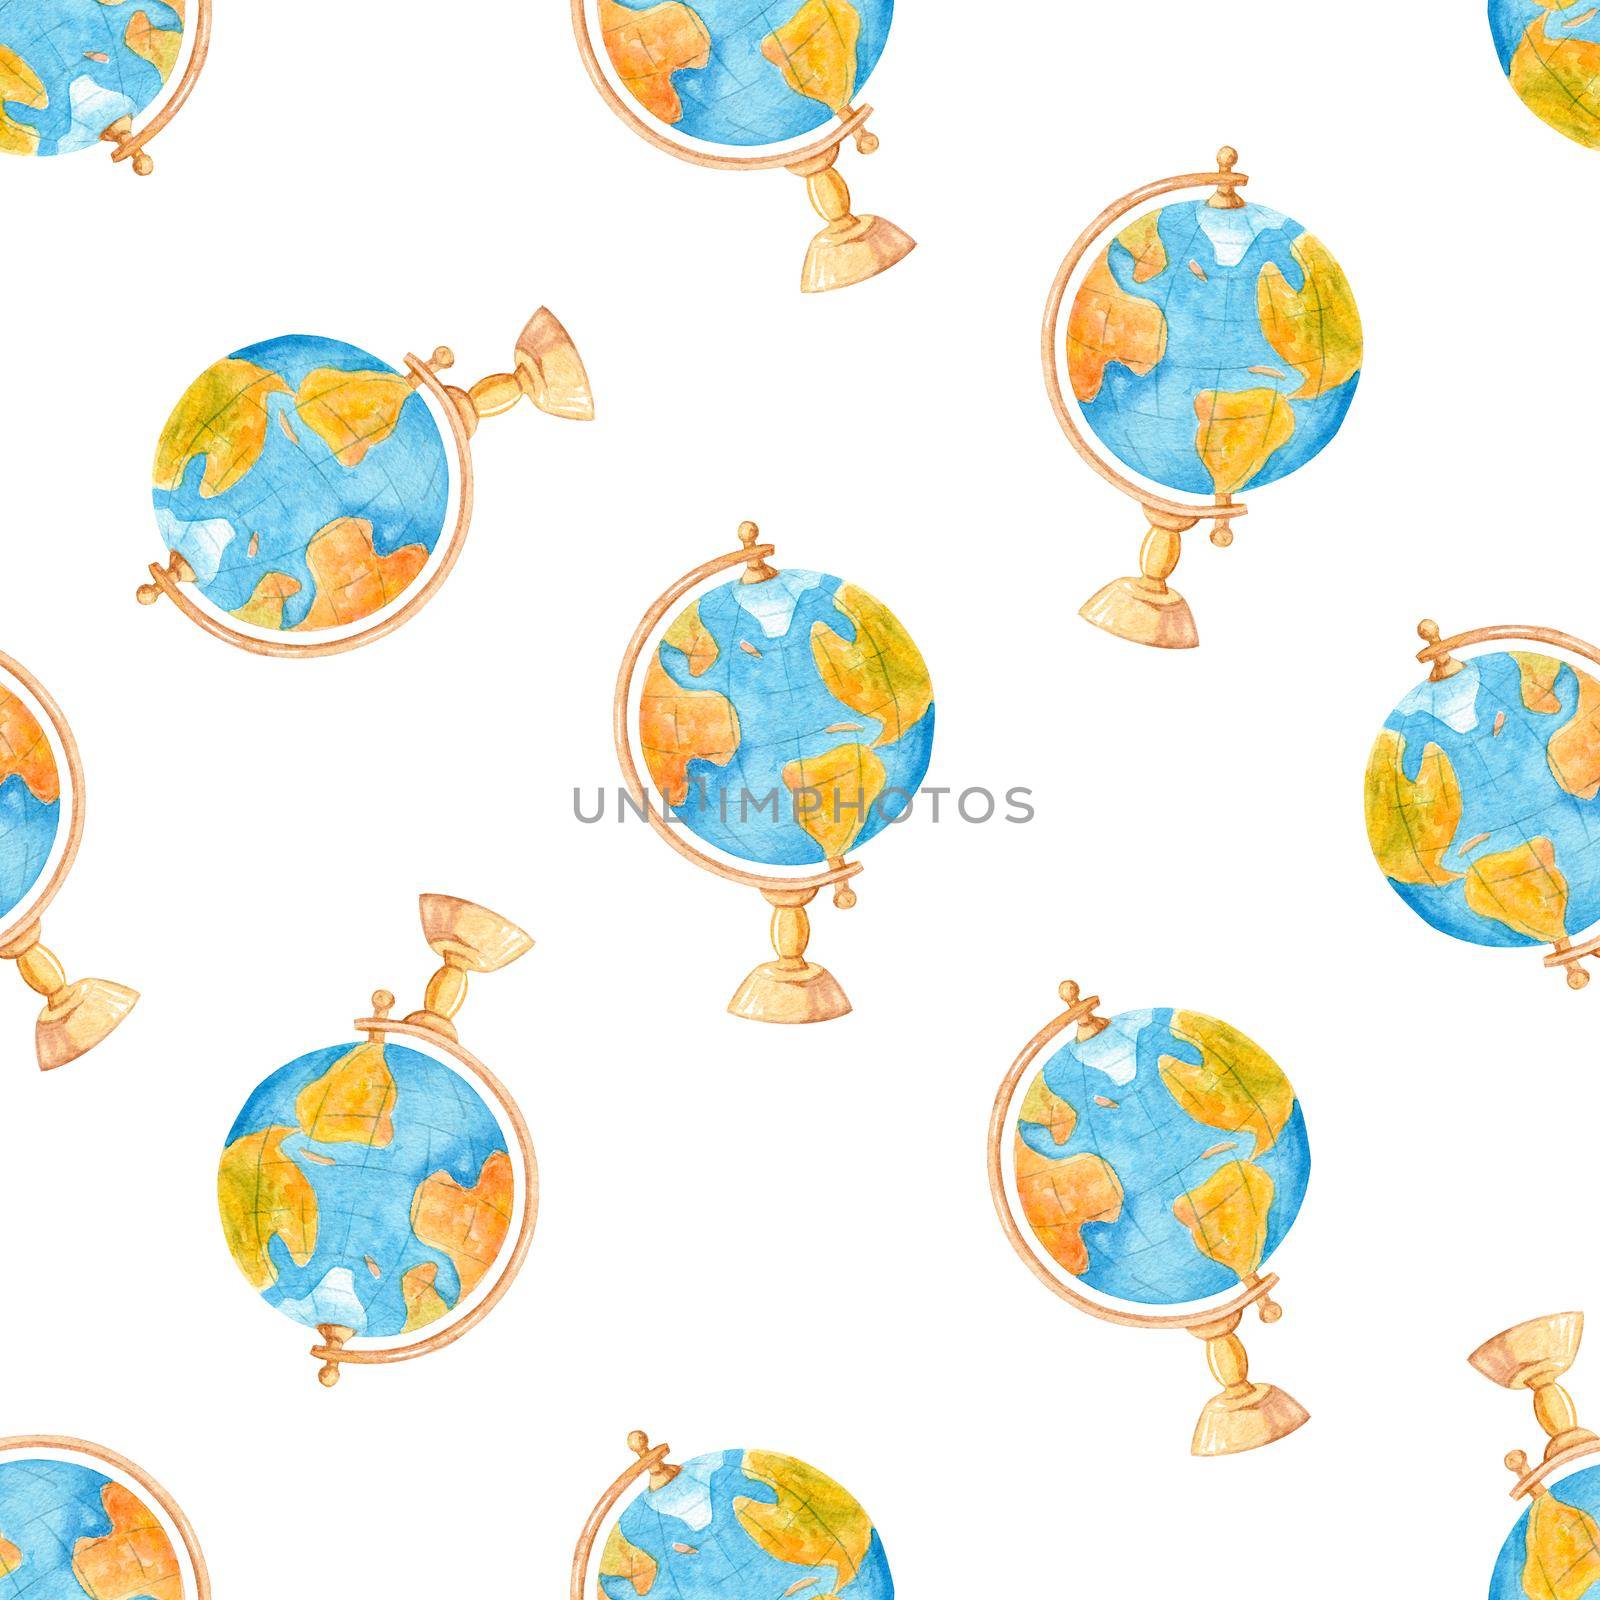 Watercolor globes seamless pattern on white background